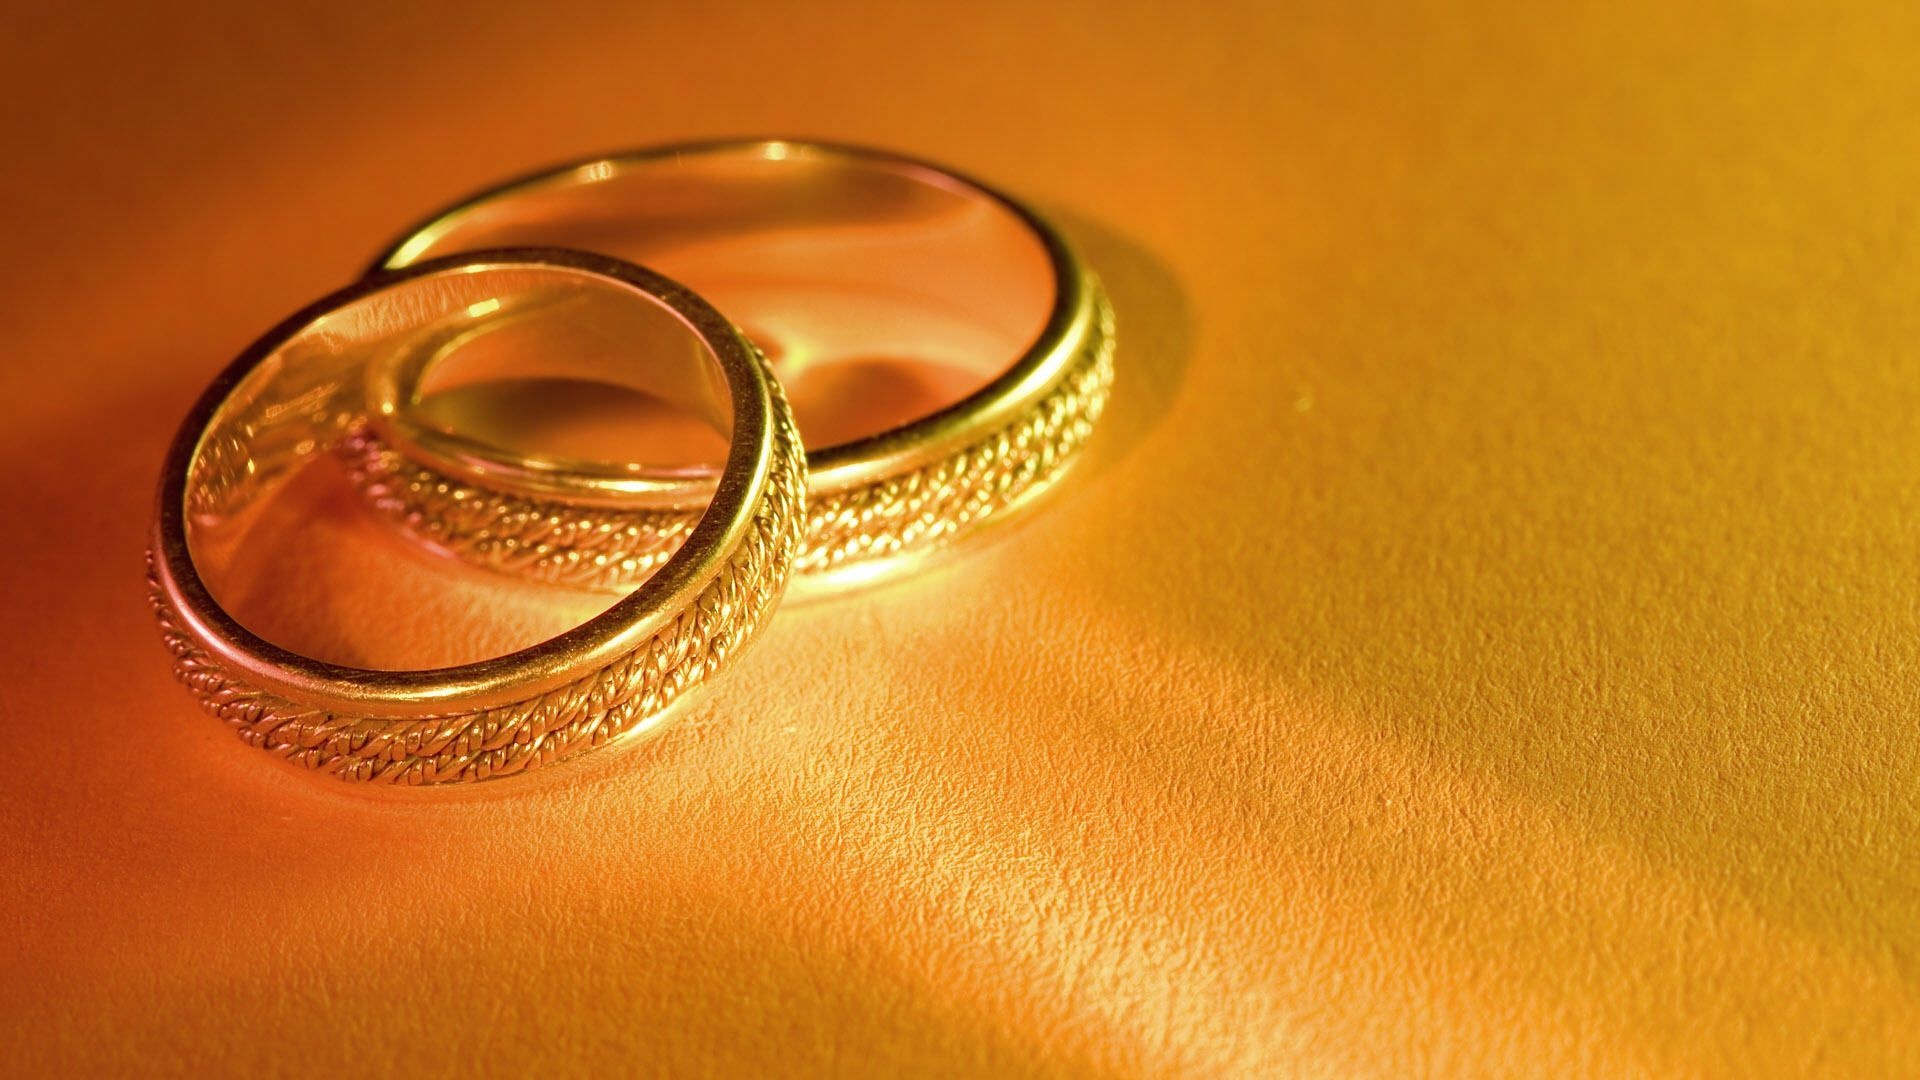 Golden Ring Wallpapers - Top Free Golden Ring Backgrounds 1920x1080